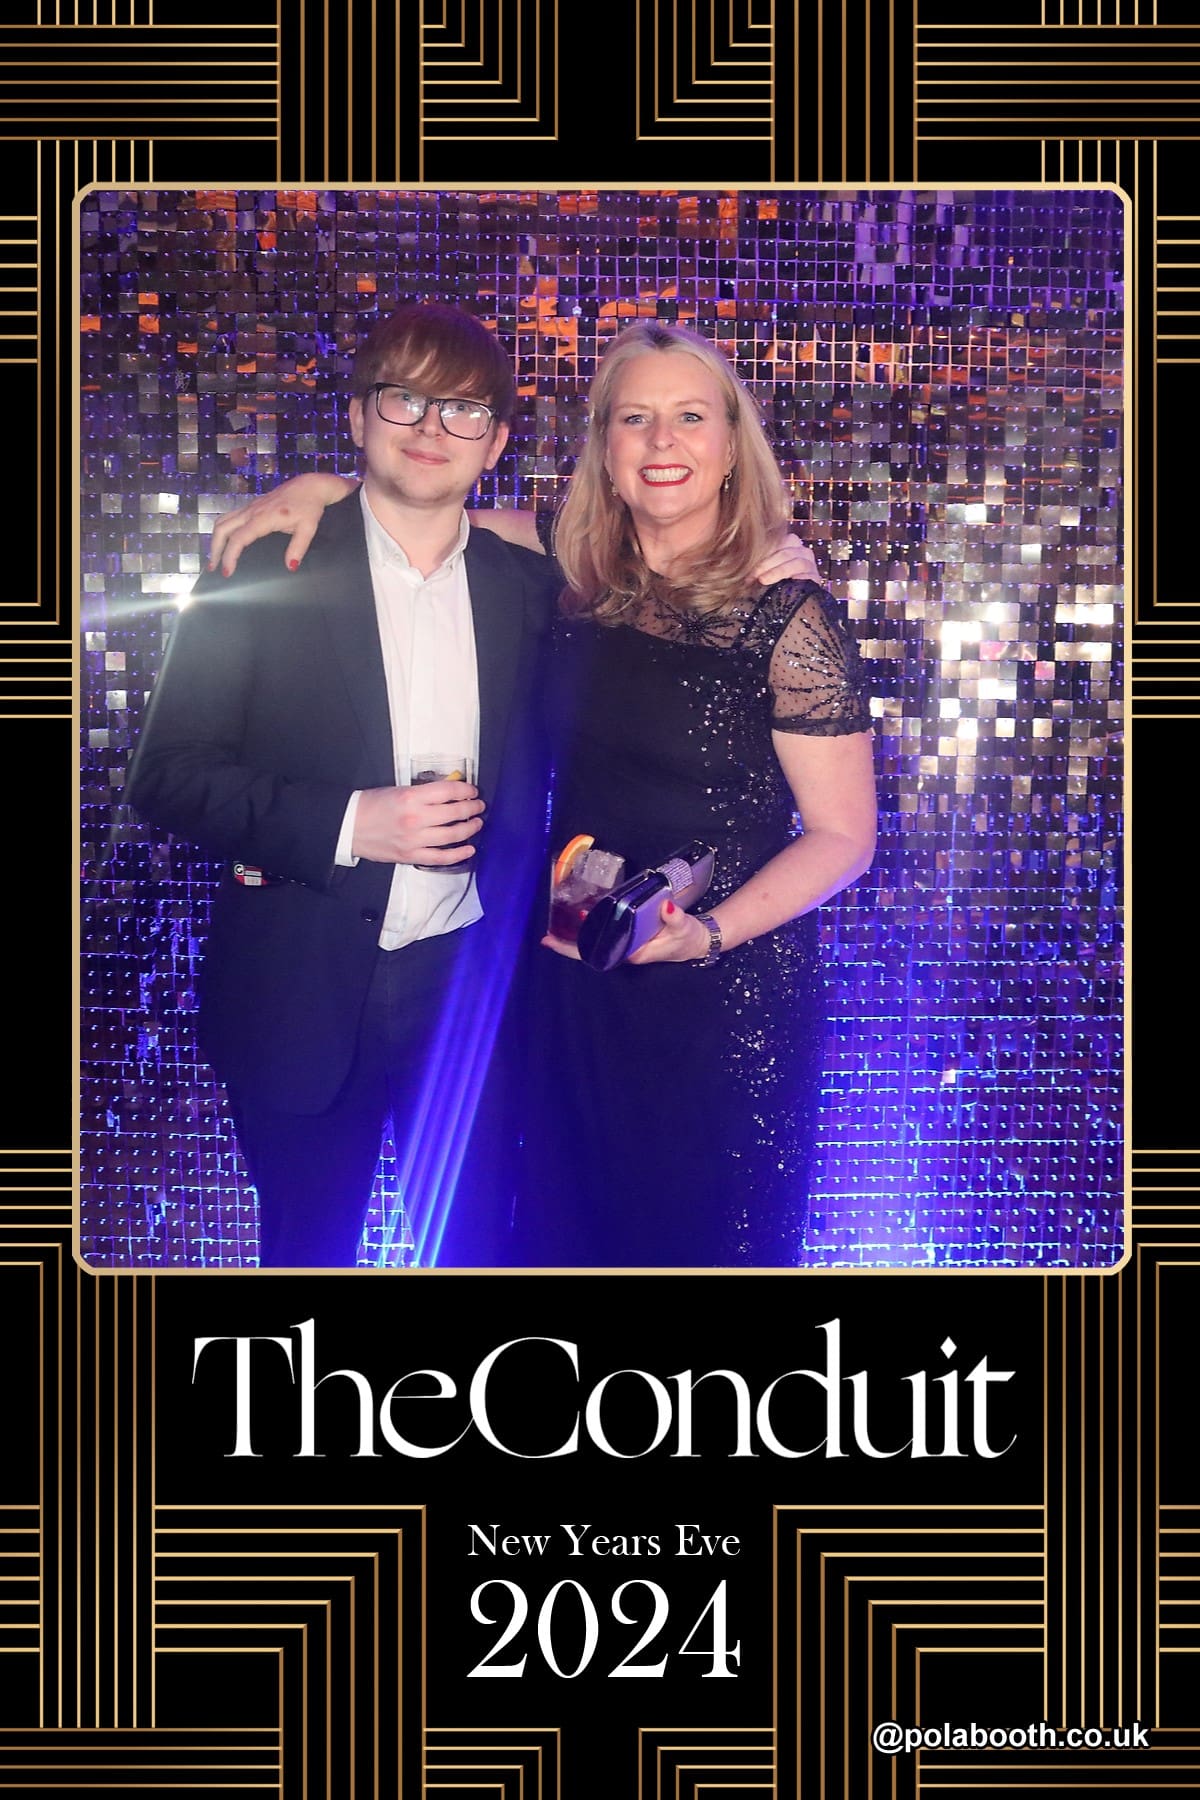 The Conduit - Covent Garden Photo booth hire